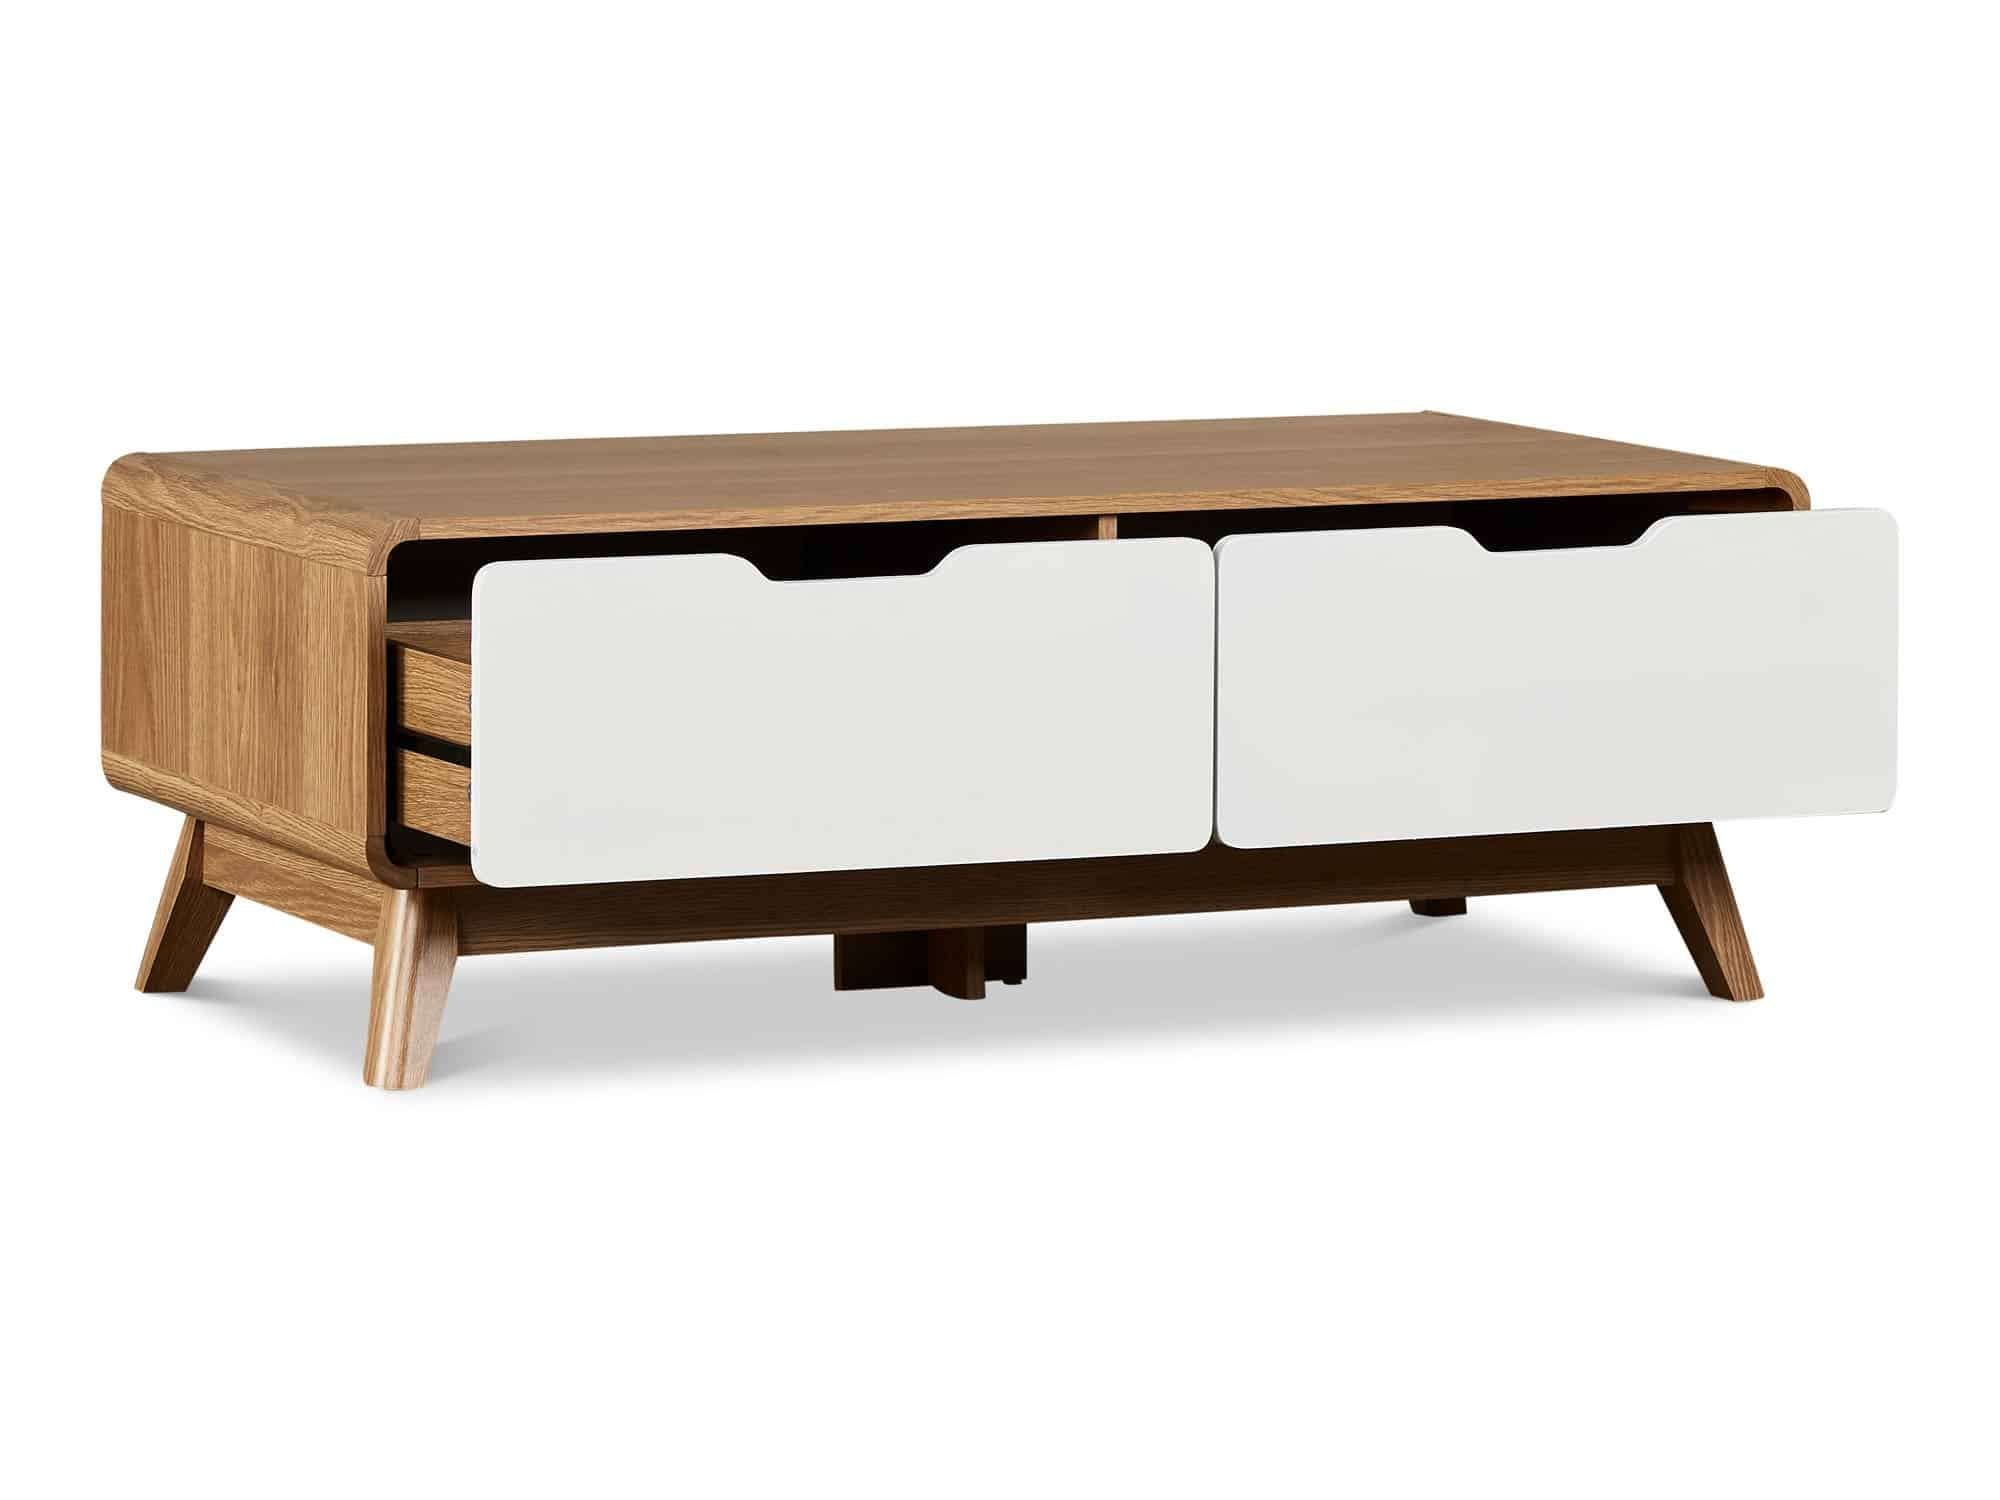 Big Save Furniture Throughout Most Current Retro Oak Coffee Tables (View 1 of 20)